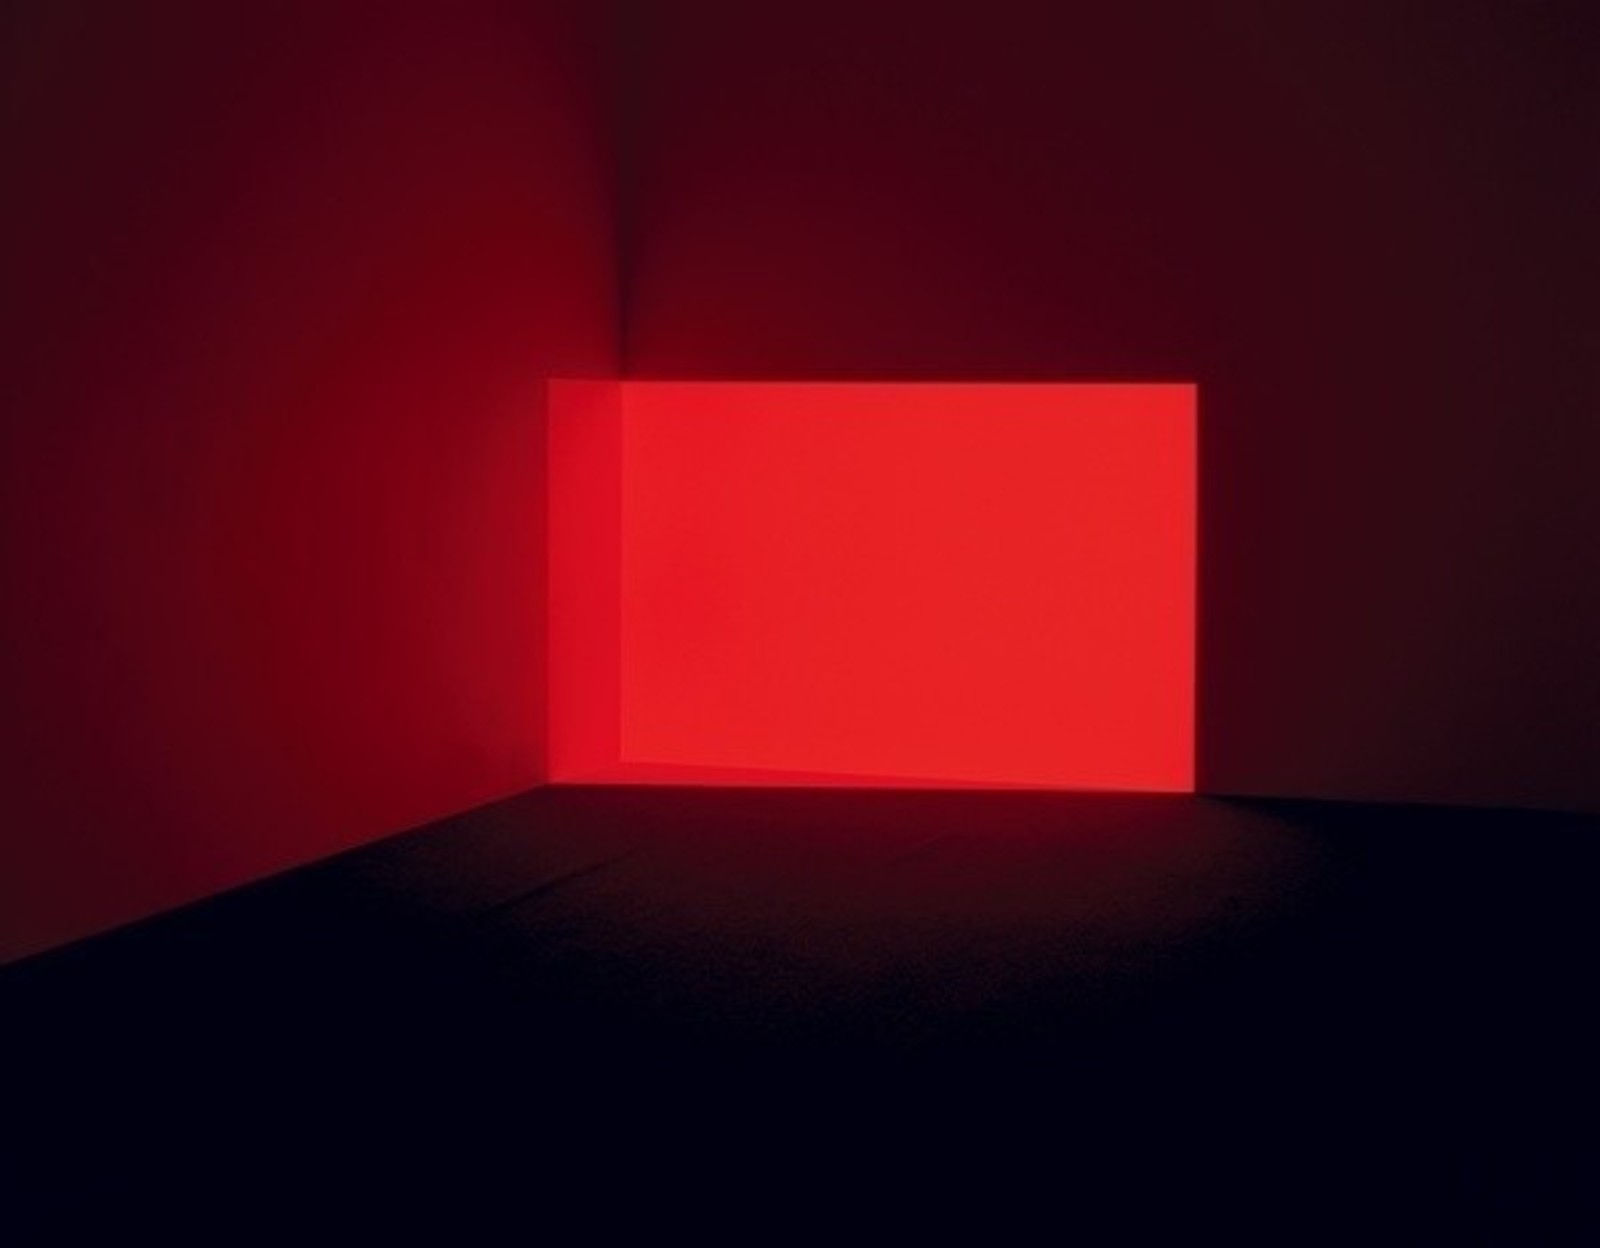 James Turell. Acro-red. 1968. Light Projection. 157 x 244 x 56 cm